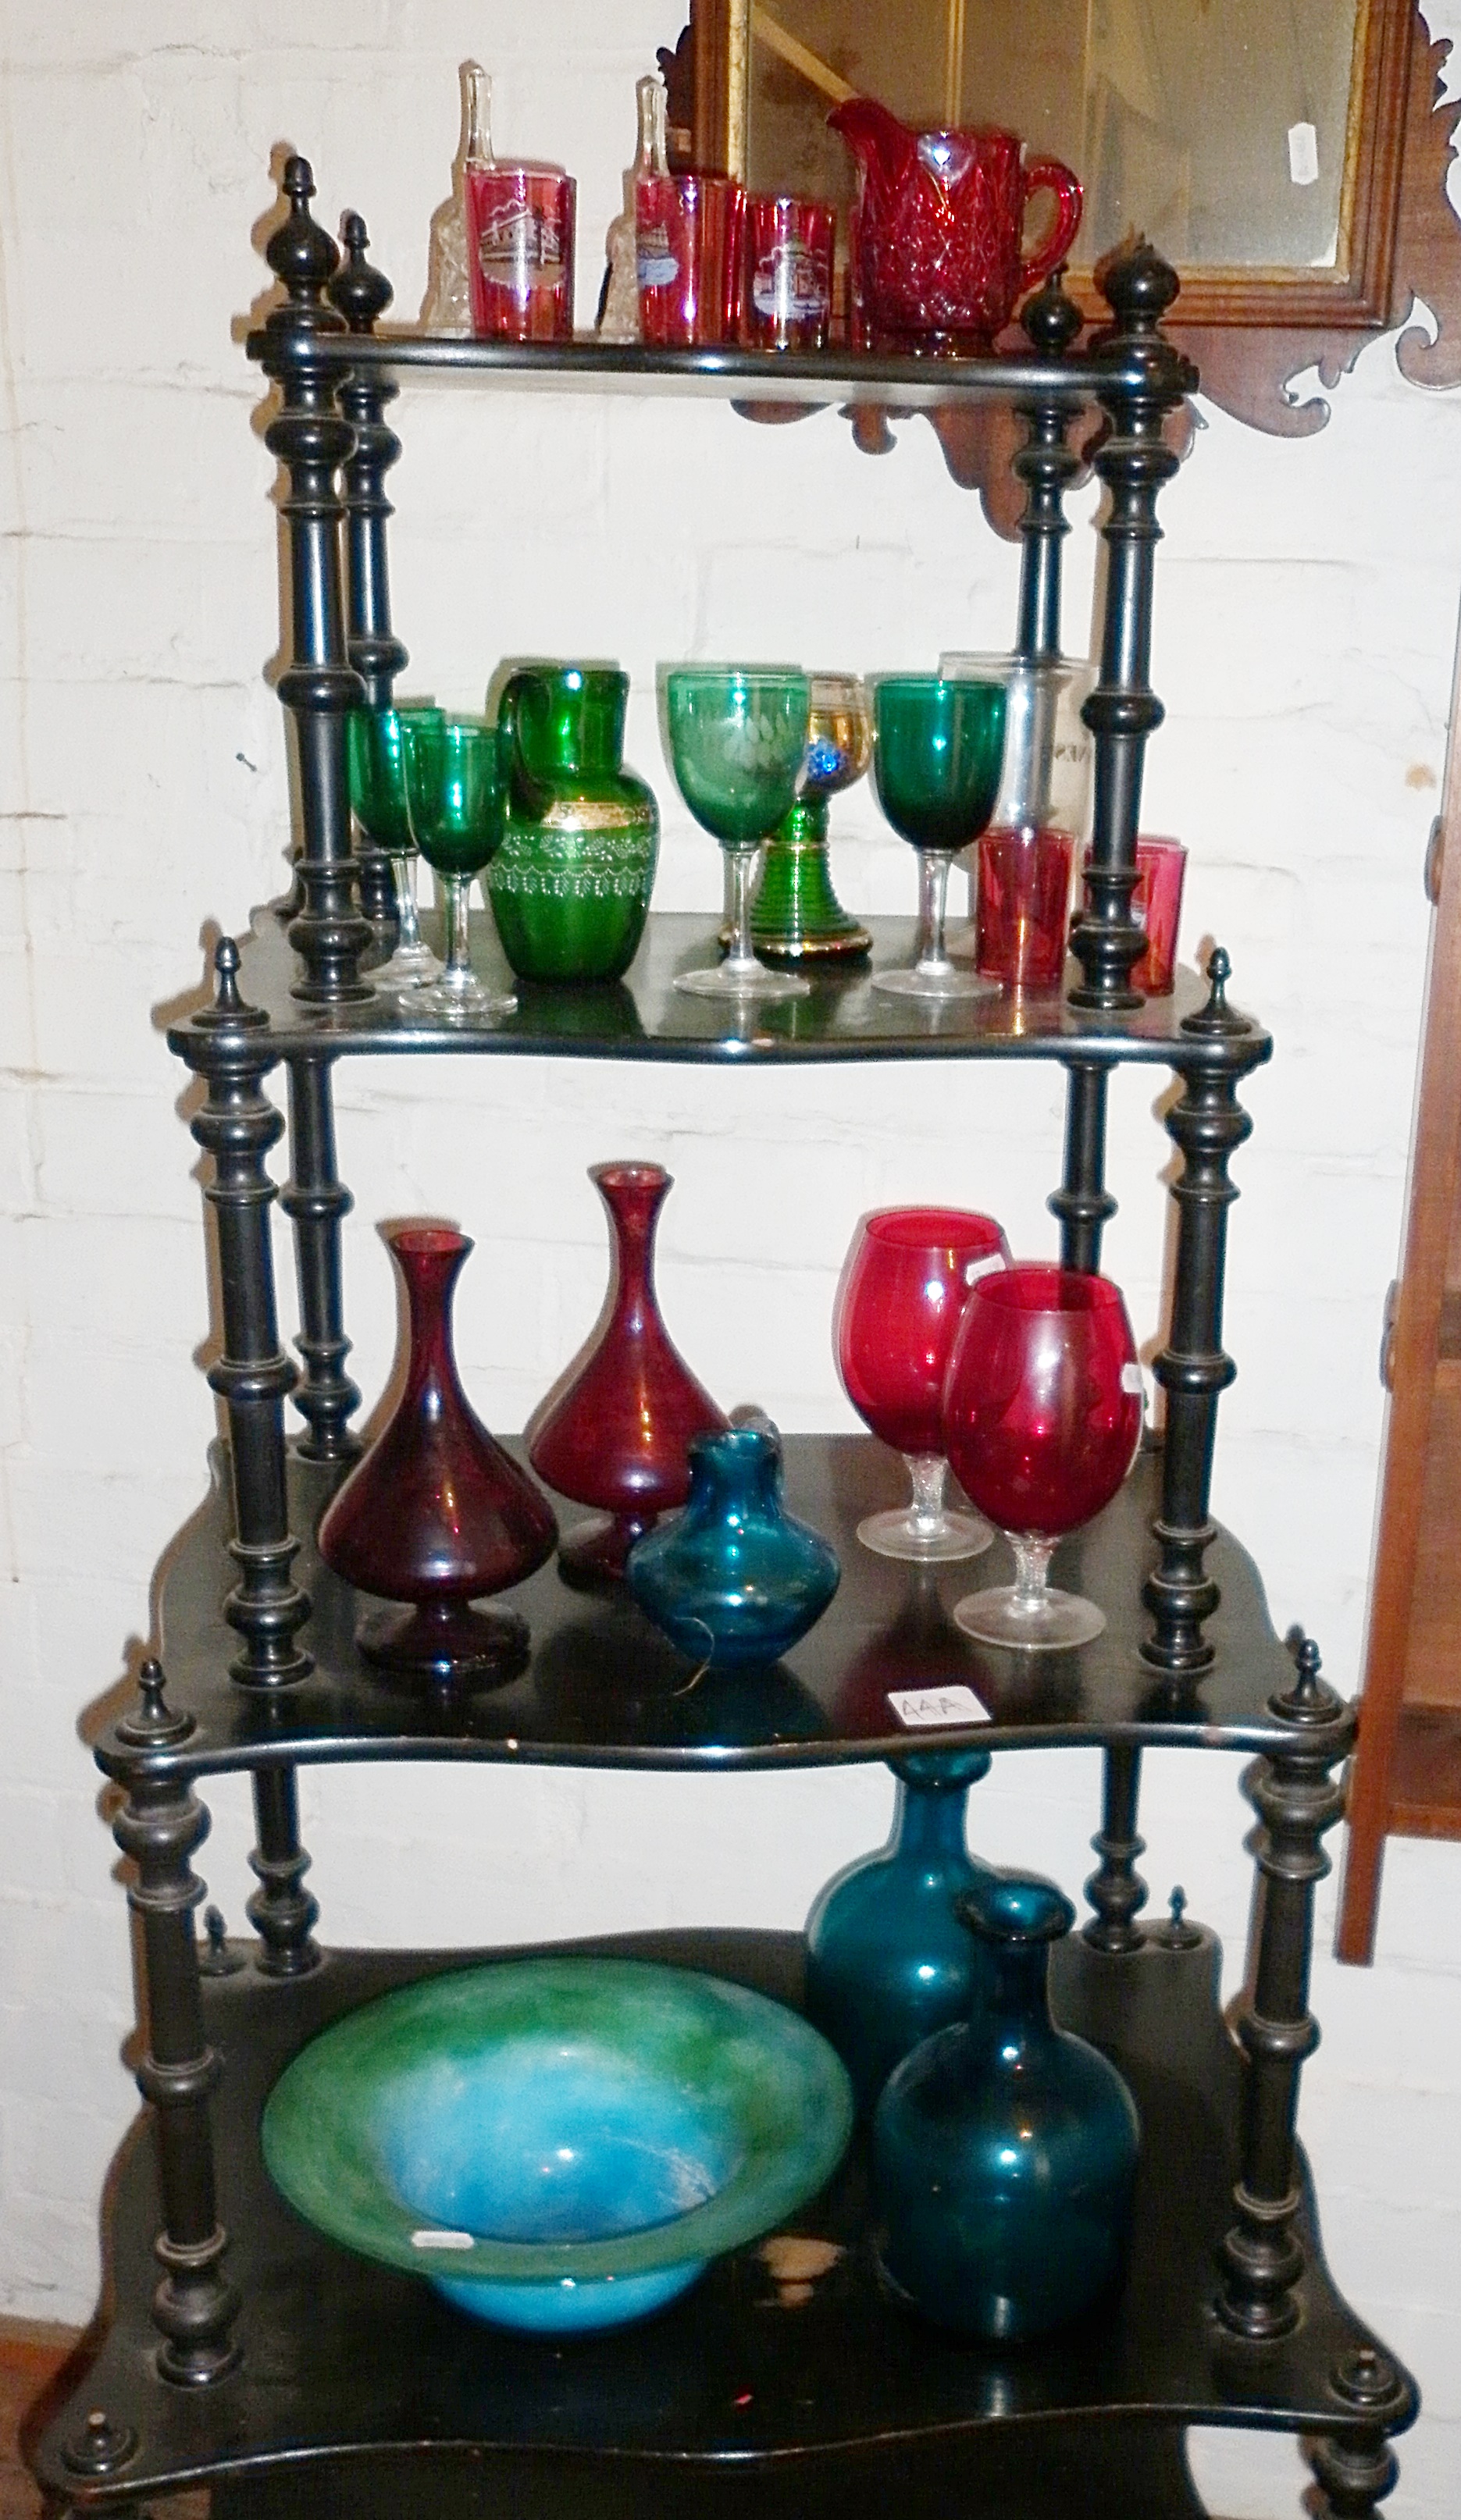 A collection of cranberry wine glasses, green glasses and a striated glass fruit bowl with two